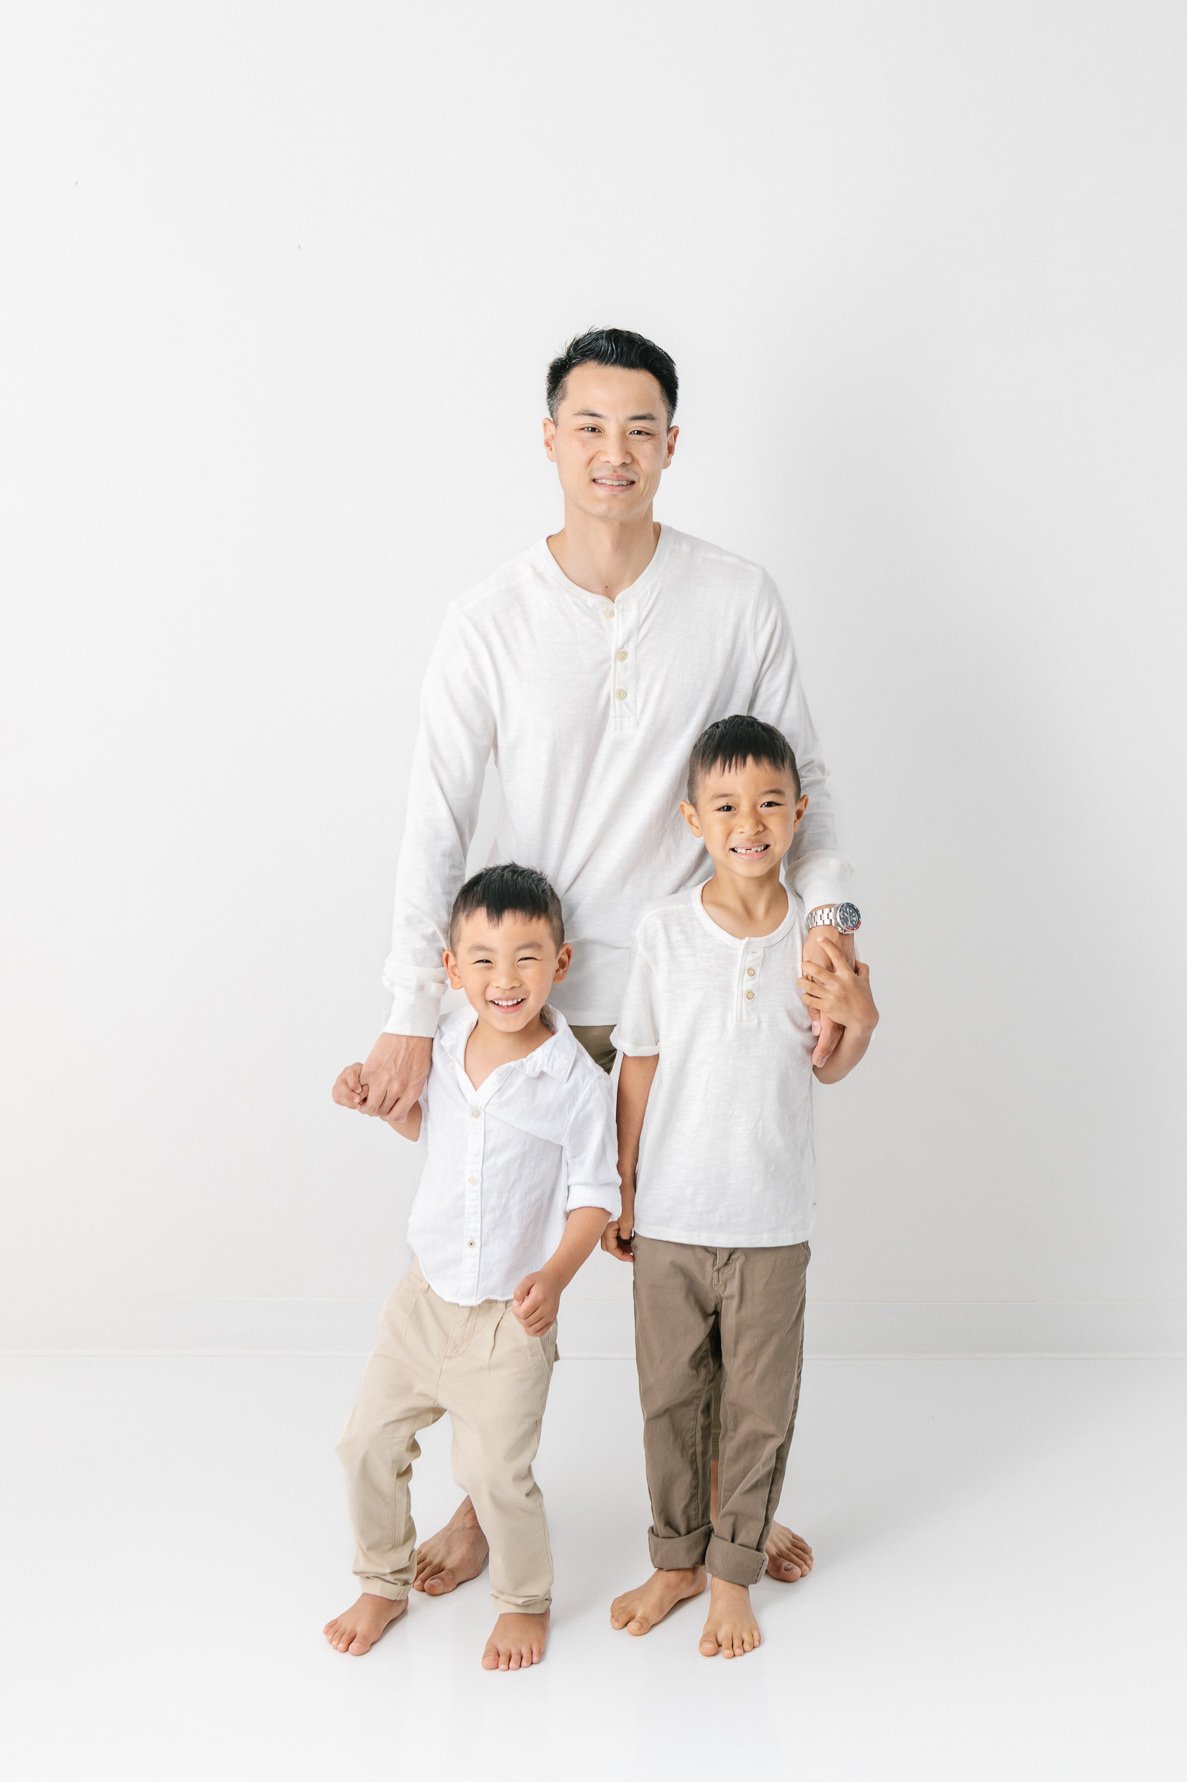    A dad and his two sons pose in a family photoshoot done by Nicole Hawkins Photography in New Jersey. Dad places an arm around both sons while everyone gazes at the camera. #studionewborns #studioportraits #babystudioportraits #NewJerseyPhotographe